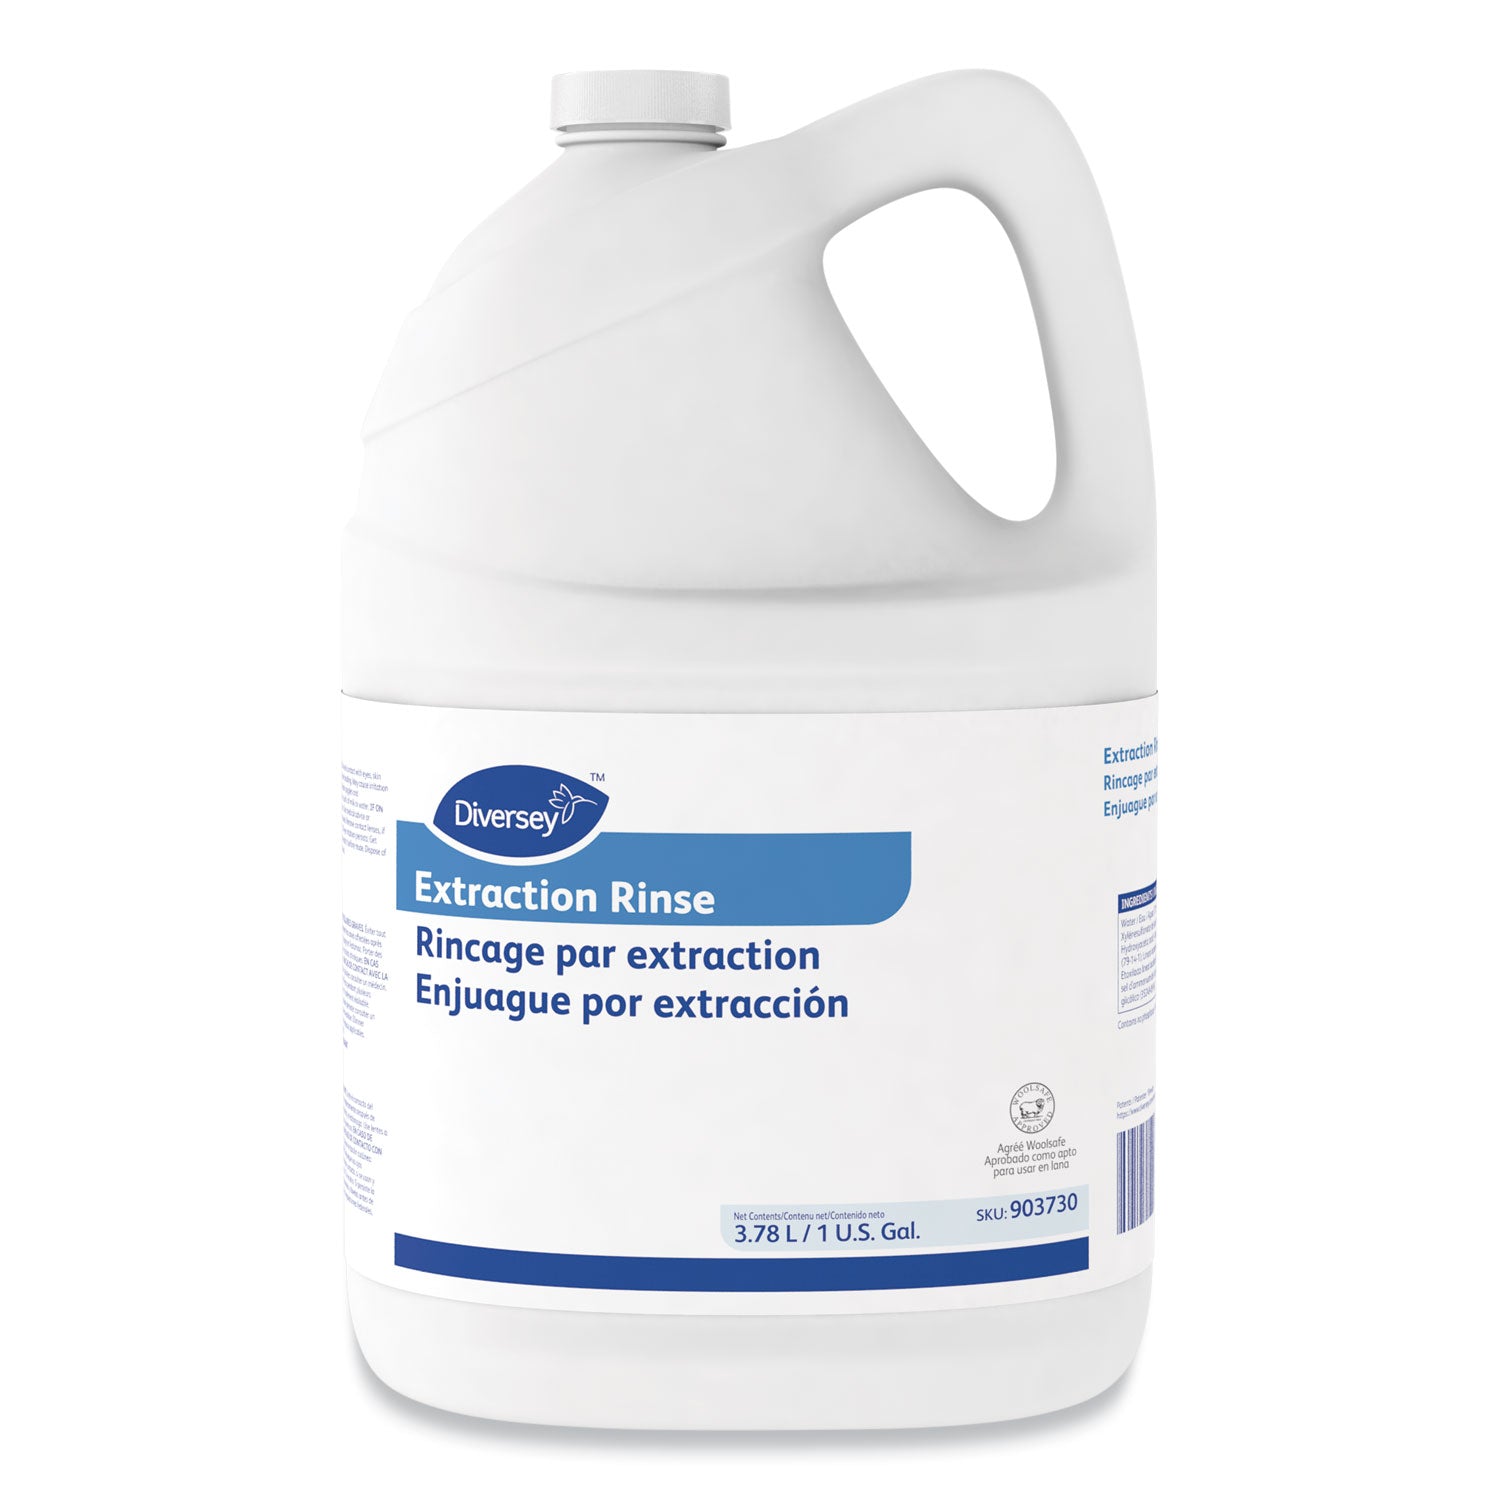 carpet-extraction-rinse-floral-scent-1-gal-bottle-4-carton_dvo903730 - 1